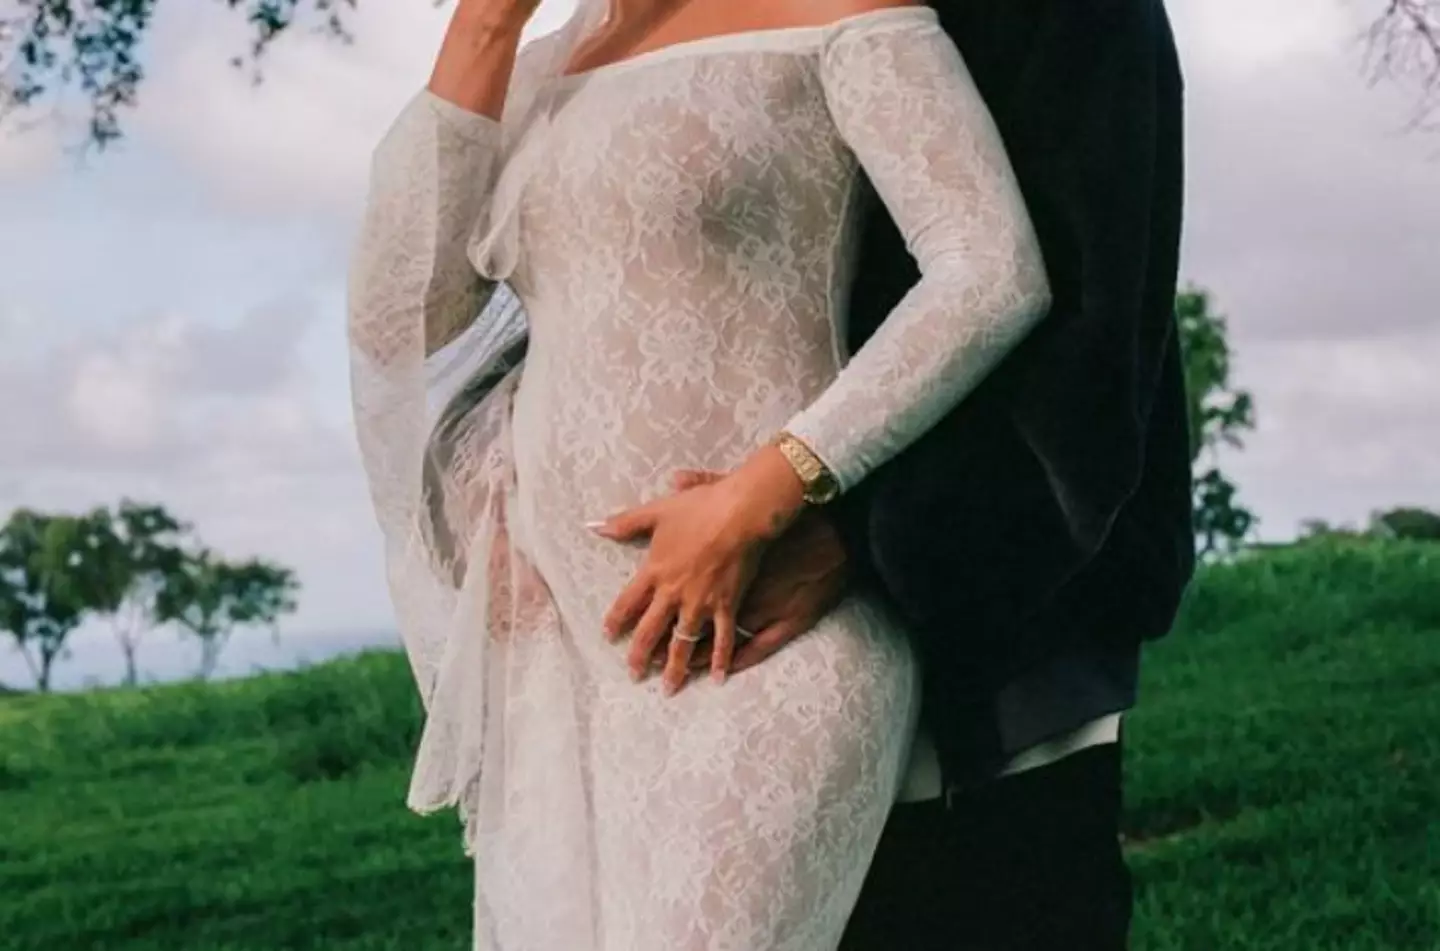 Justin and Hailey Bieber tied the knot (again) and announced their baby. (Instagram/@justinbieber)